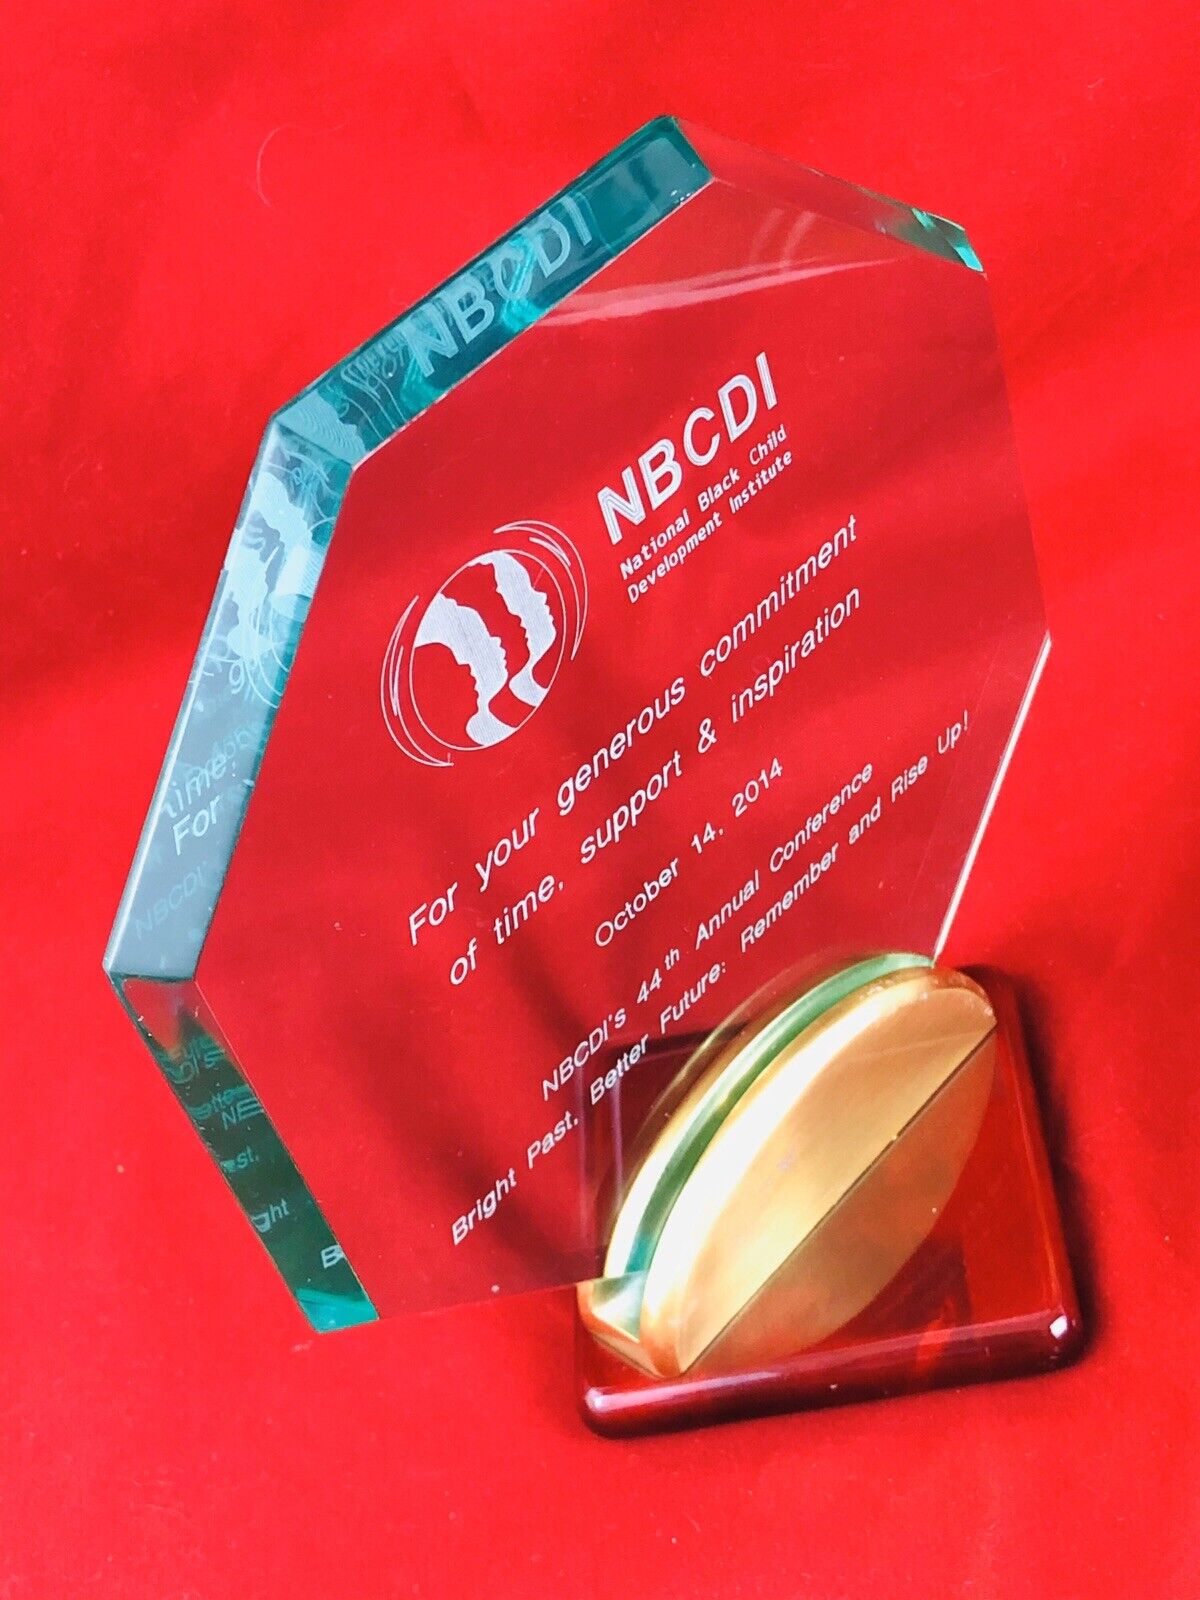 NBCDI's 44th Annual Conference Award Presented to Dick Gregory - 2014 - Acrylic